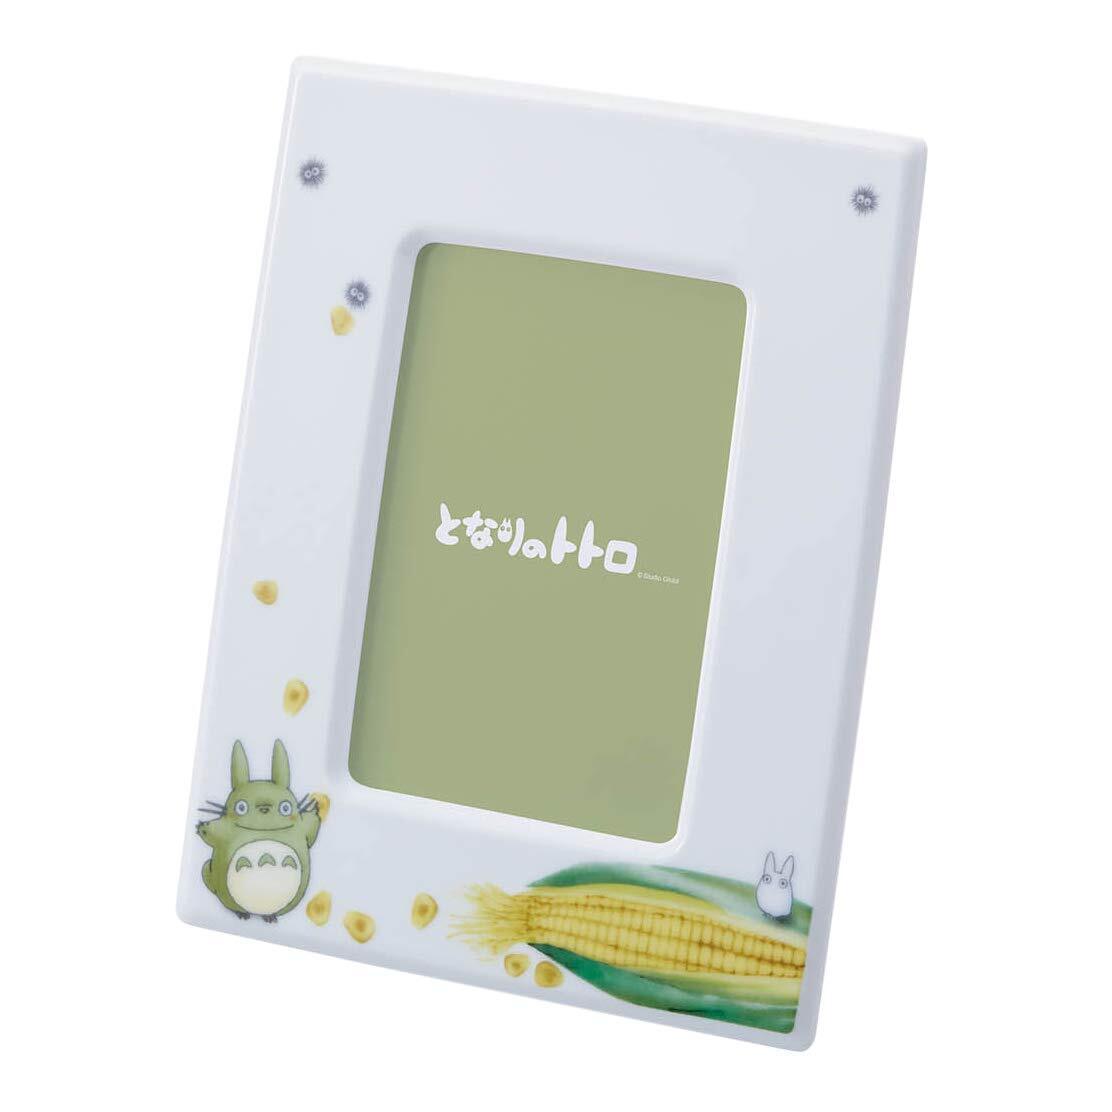 Noritake Photo Frame White Long axis: approx. 20 cm, short axis: approx. 16 cm,